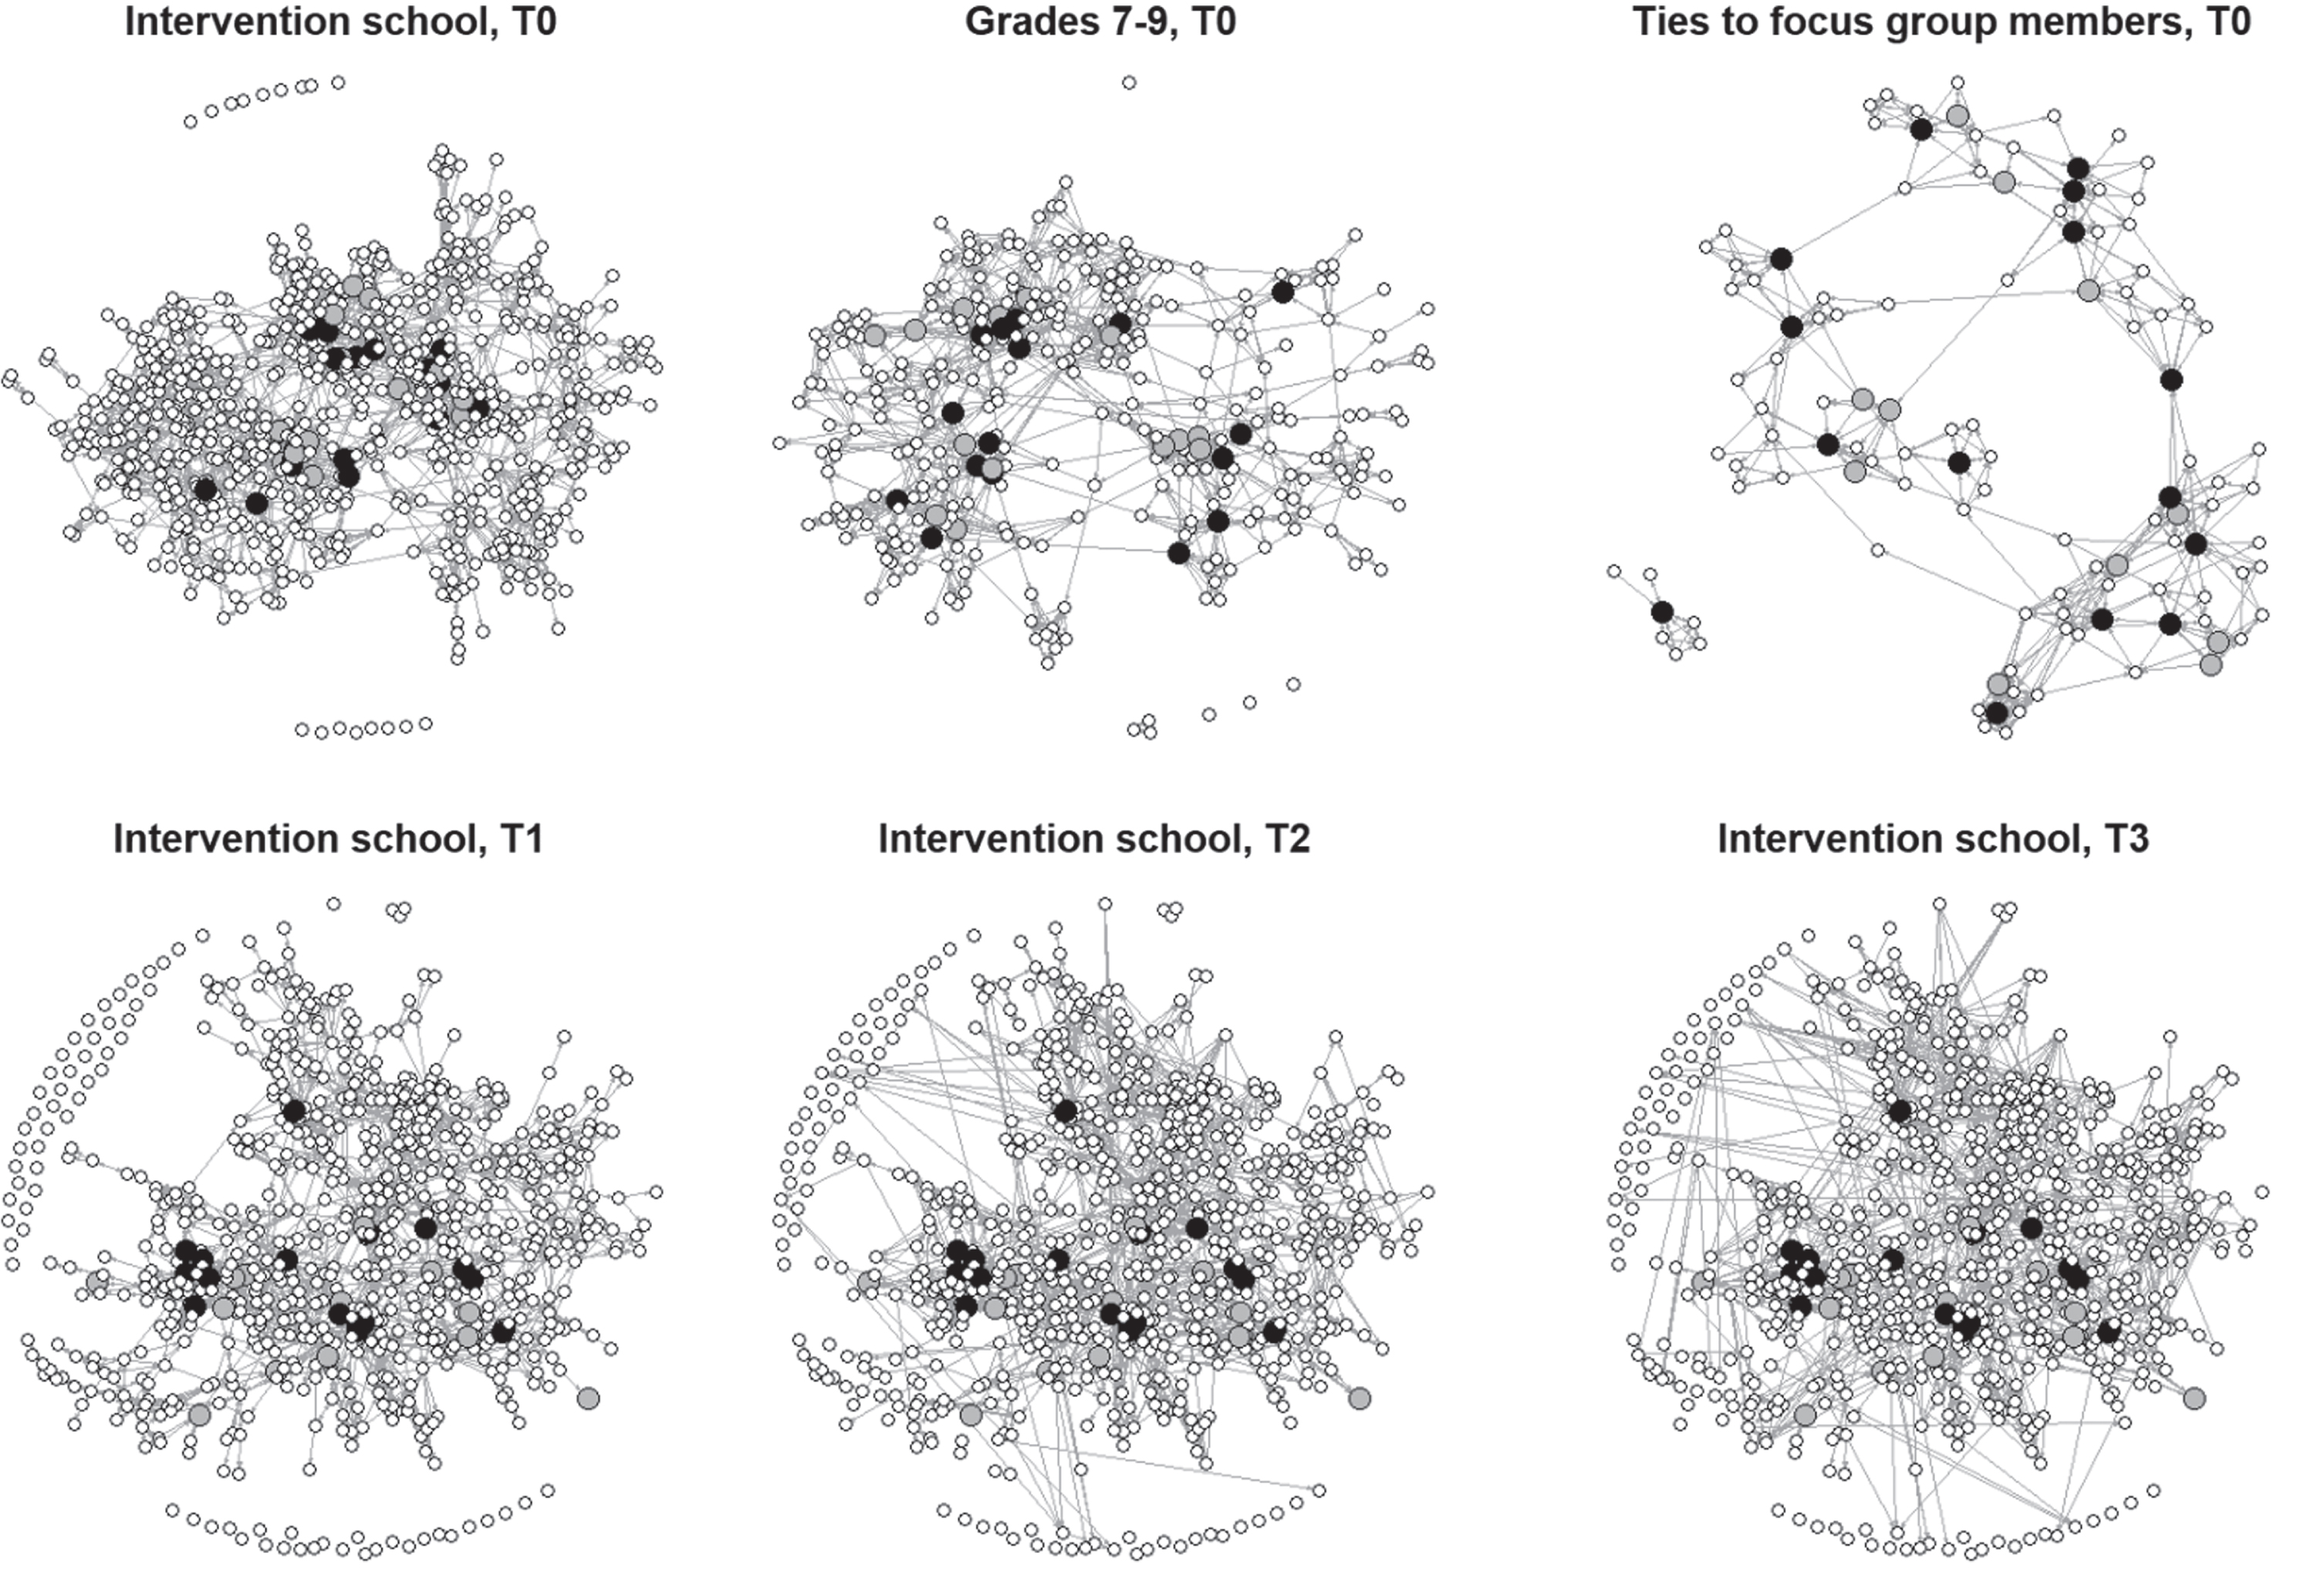 Social Networks of Intervention School Across Time with Distribution of Focus Group-Selected (Black) and Non-Selected (Grey) Social ReferentsNote. N = 767. Unconnected nodes due to non-participation across wave or lack of nominations. Social referents and focus group members were obtained at T0 and their position in the network for T1-T3 is highlighted based on that initial selection. The network for grades 7-9 at T0 includes only participants from these grades and all social referents in these grades. The network titled “Ties to focus group members at T0” includes only individuals with direct outgoing ties to social referents.